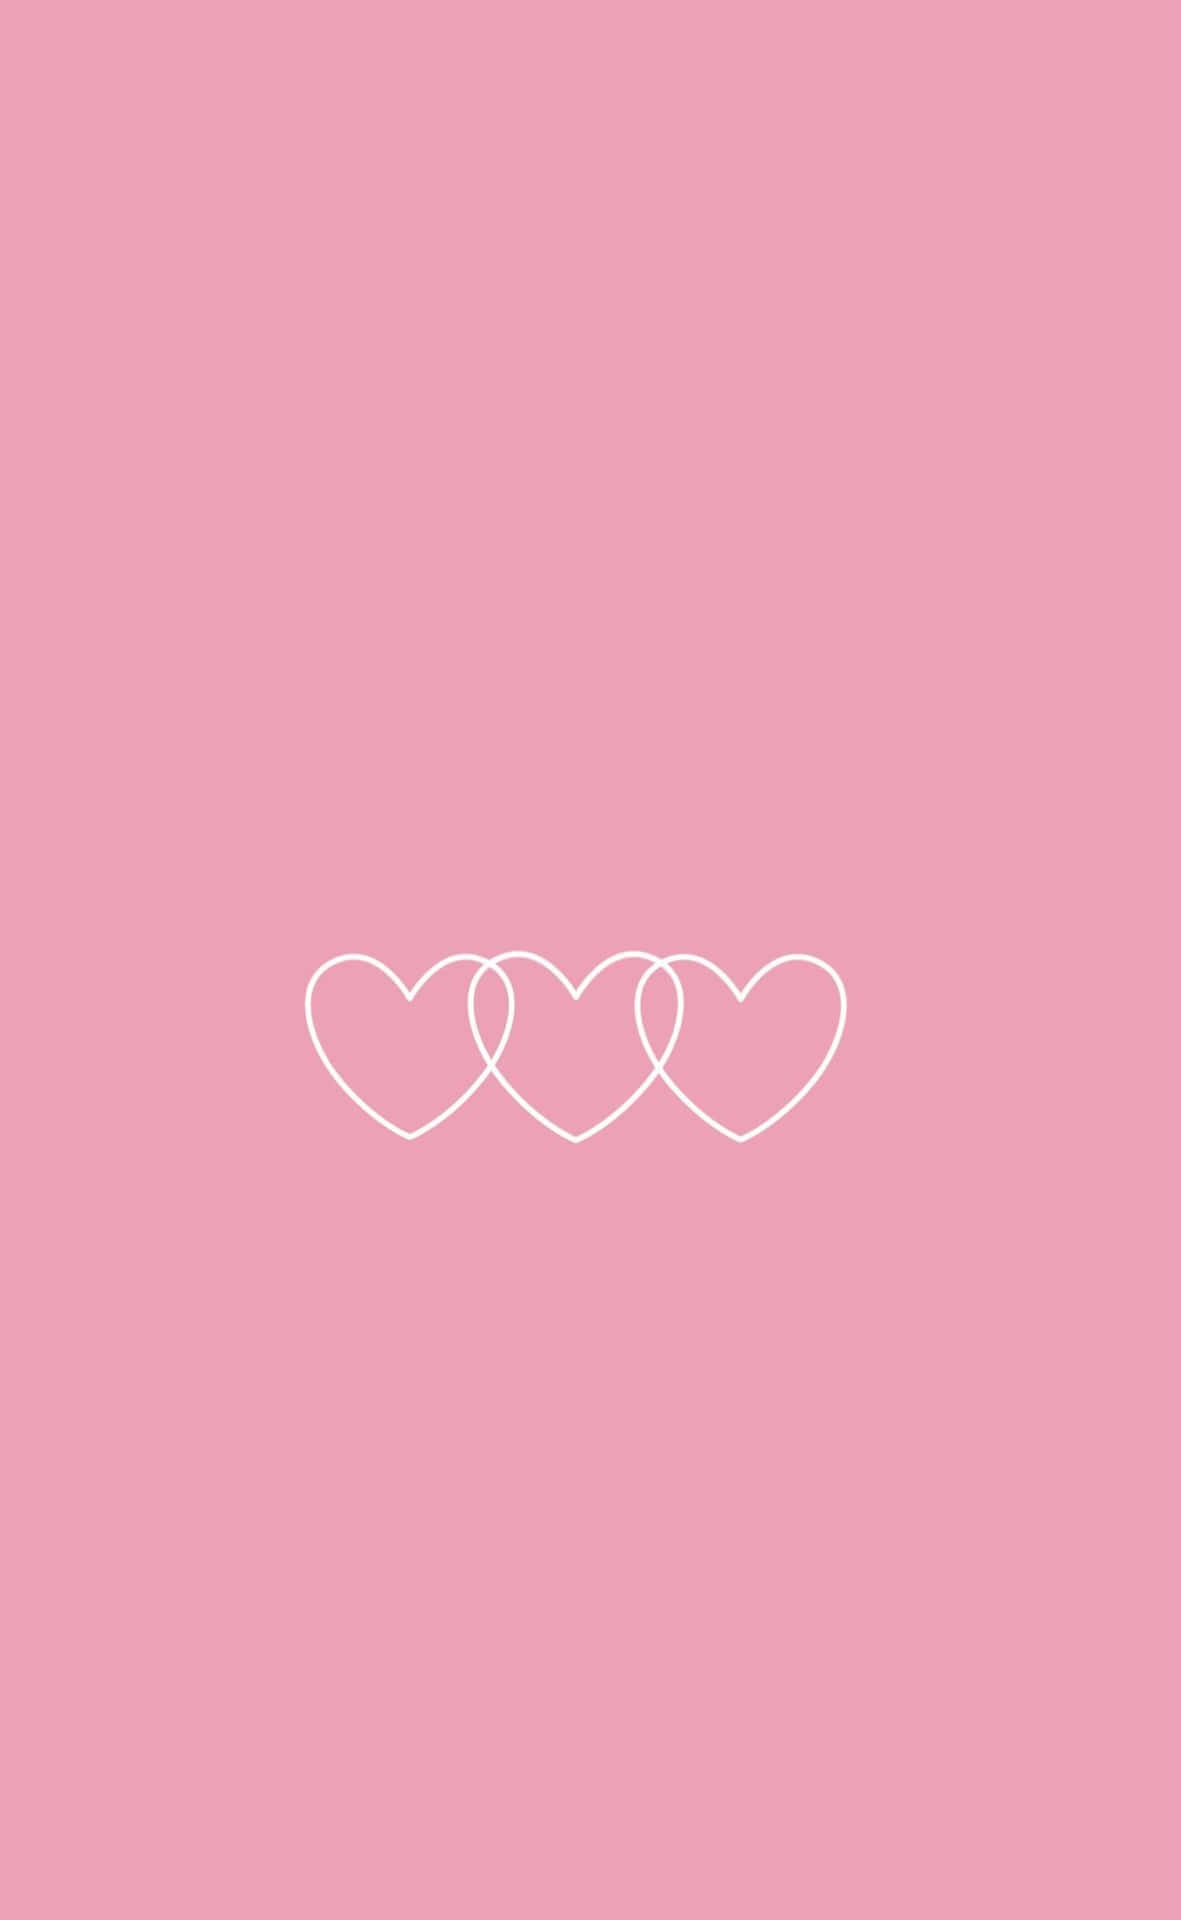 Three Connected Pink Hearts Iphone Wallpaper